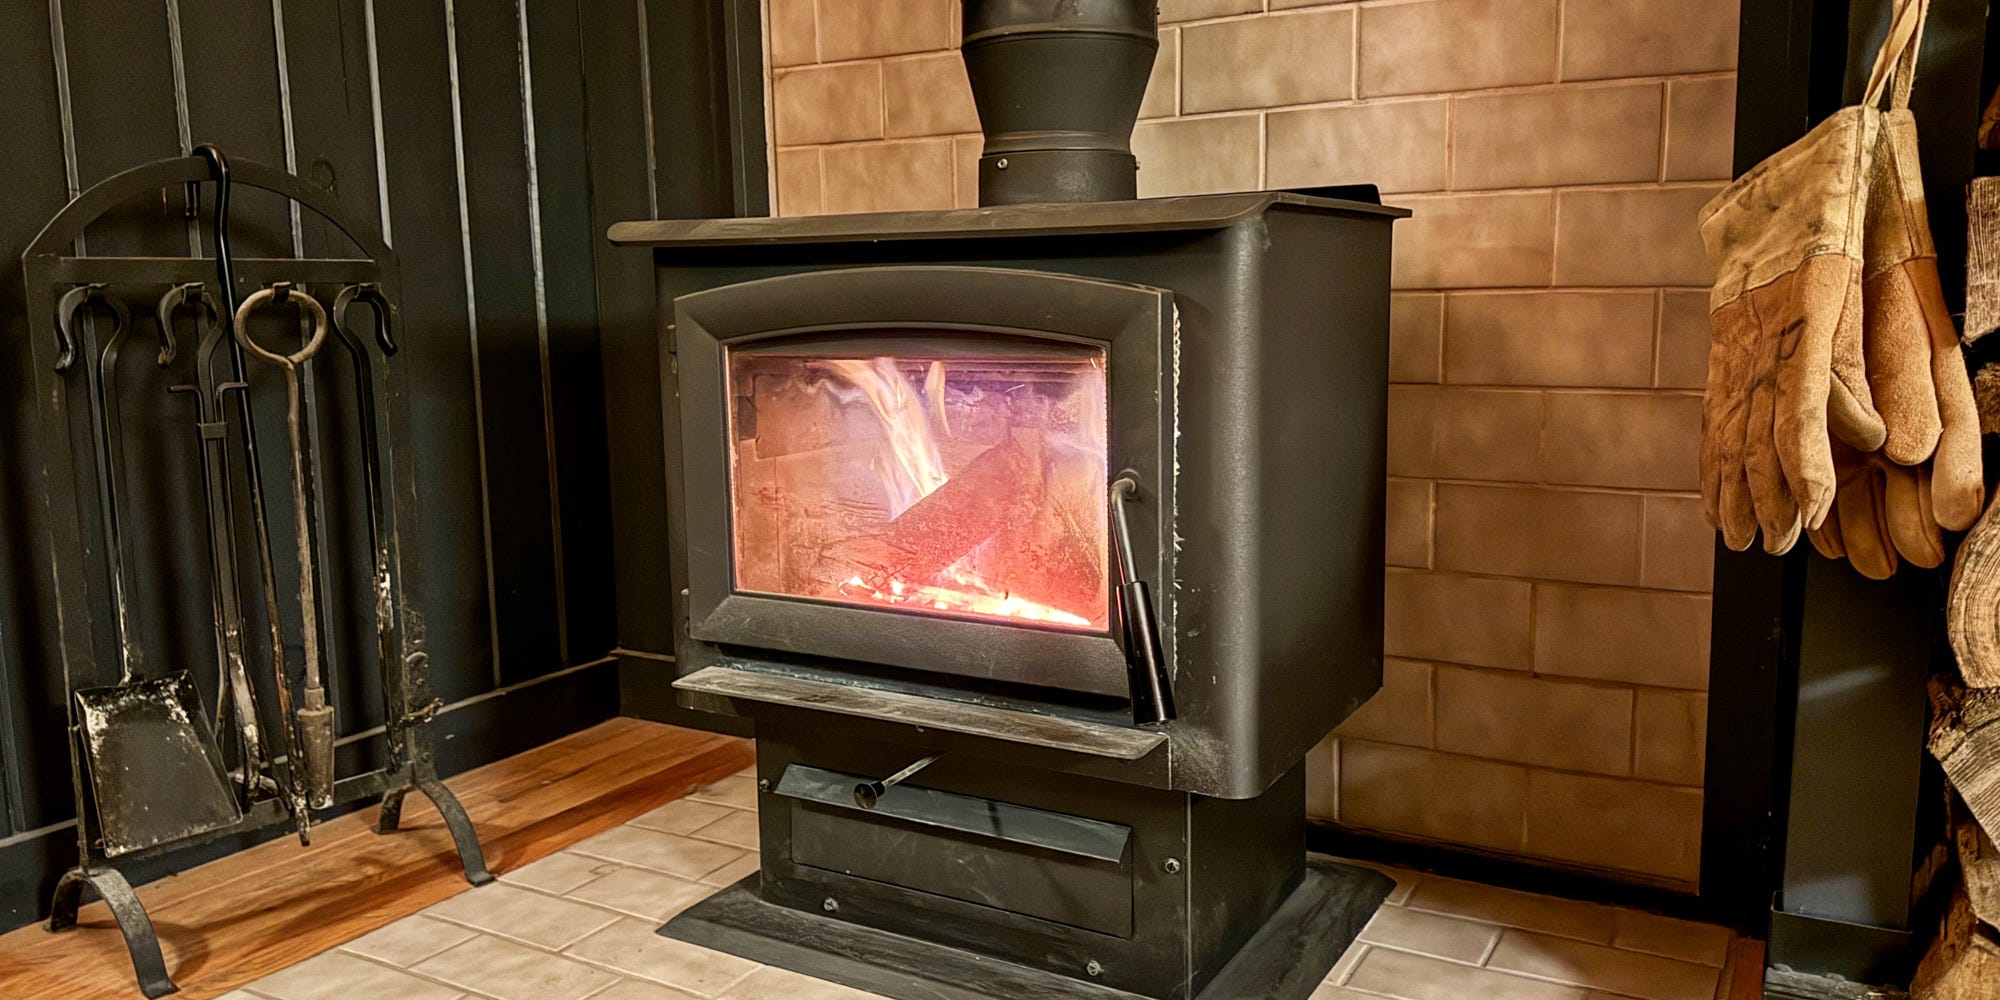 The 11 Best Wood Stoves for Warmth, Ambiance, and More